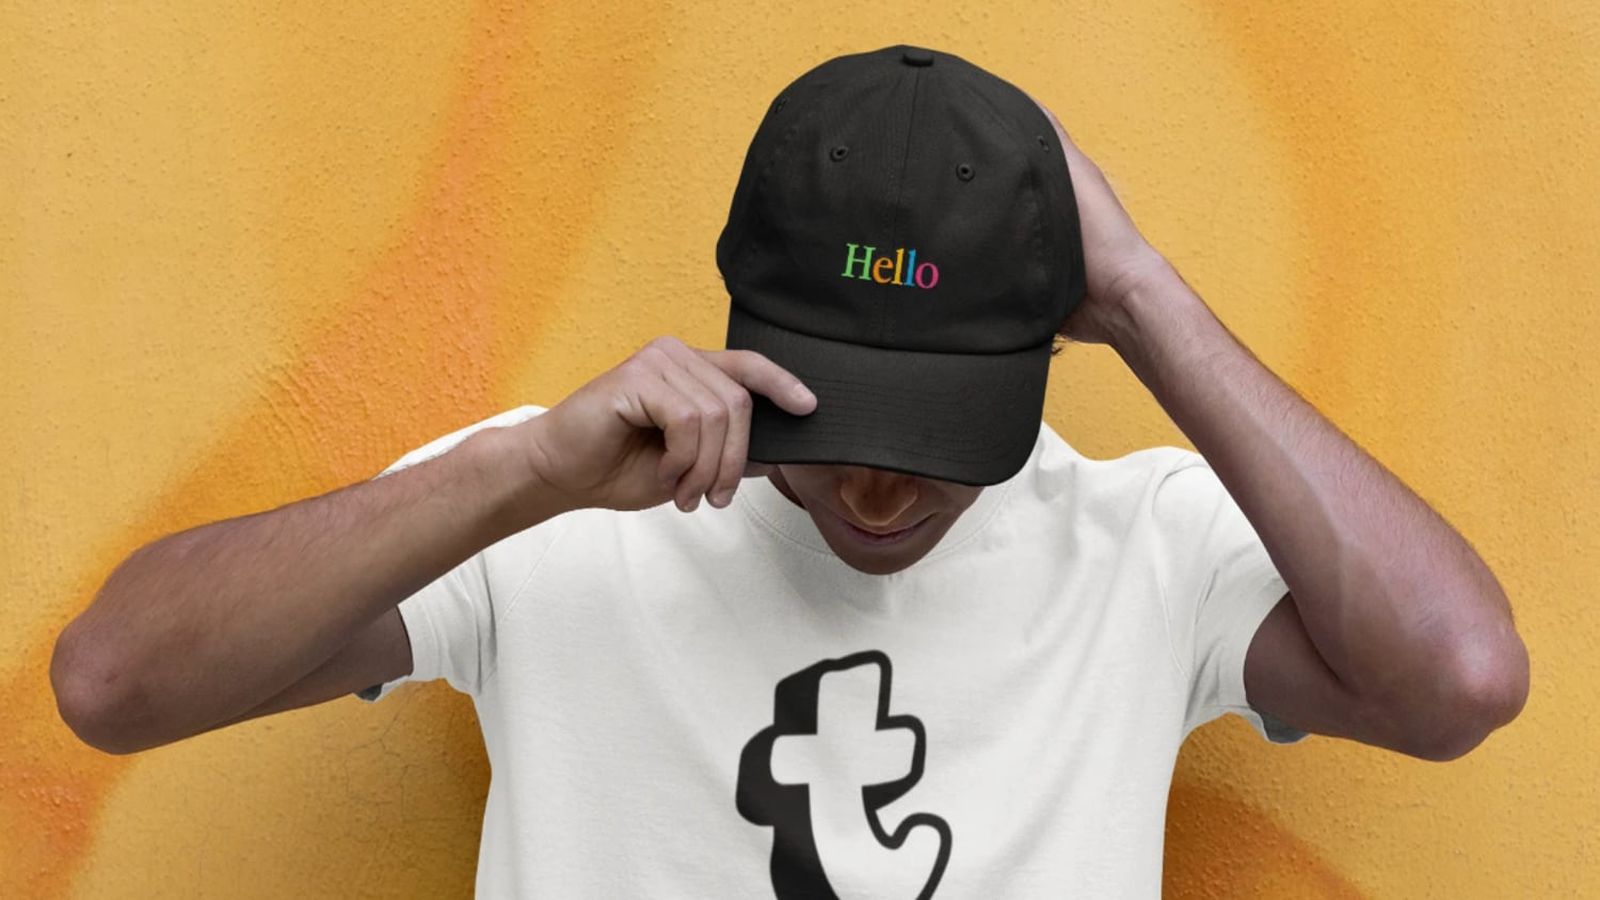 MacRumors Giveaway: Win an Apple-Themed T-Shirt or Hat From Throwboy